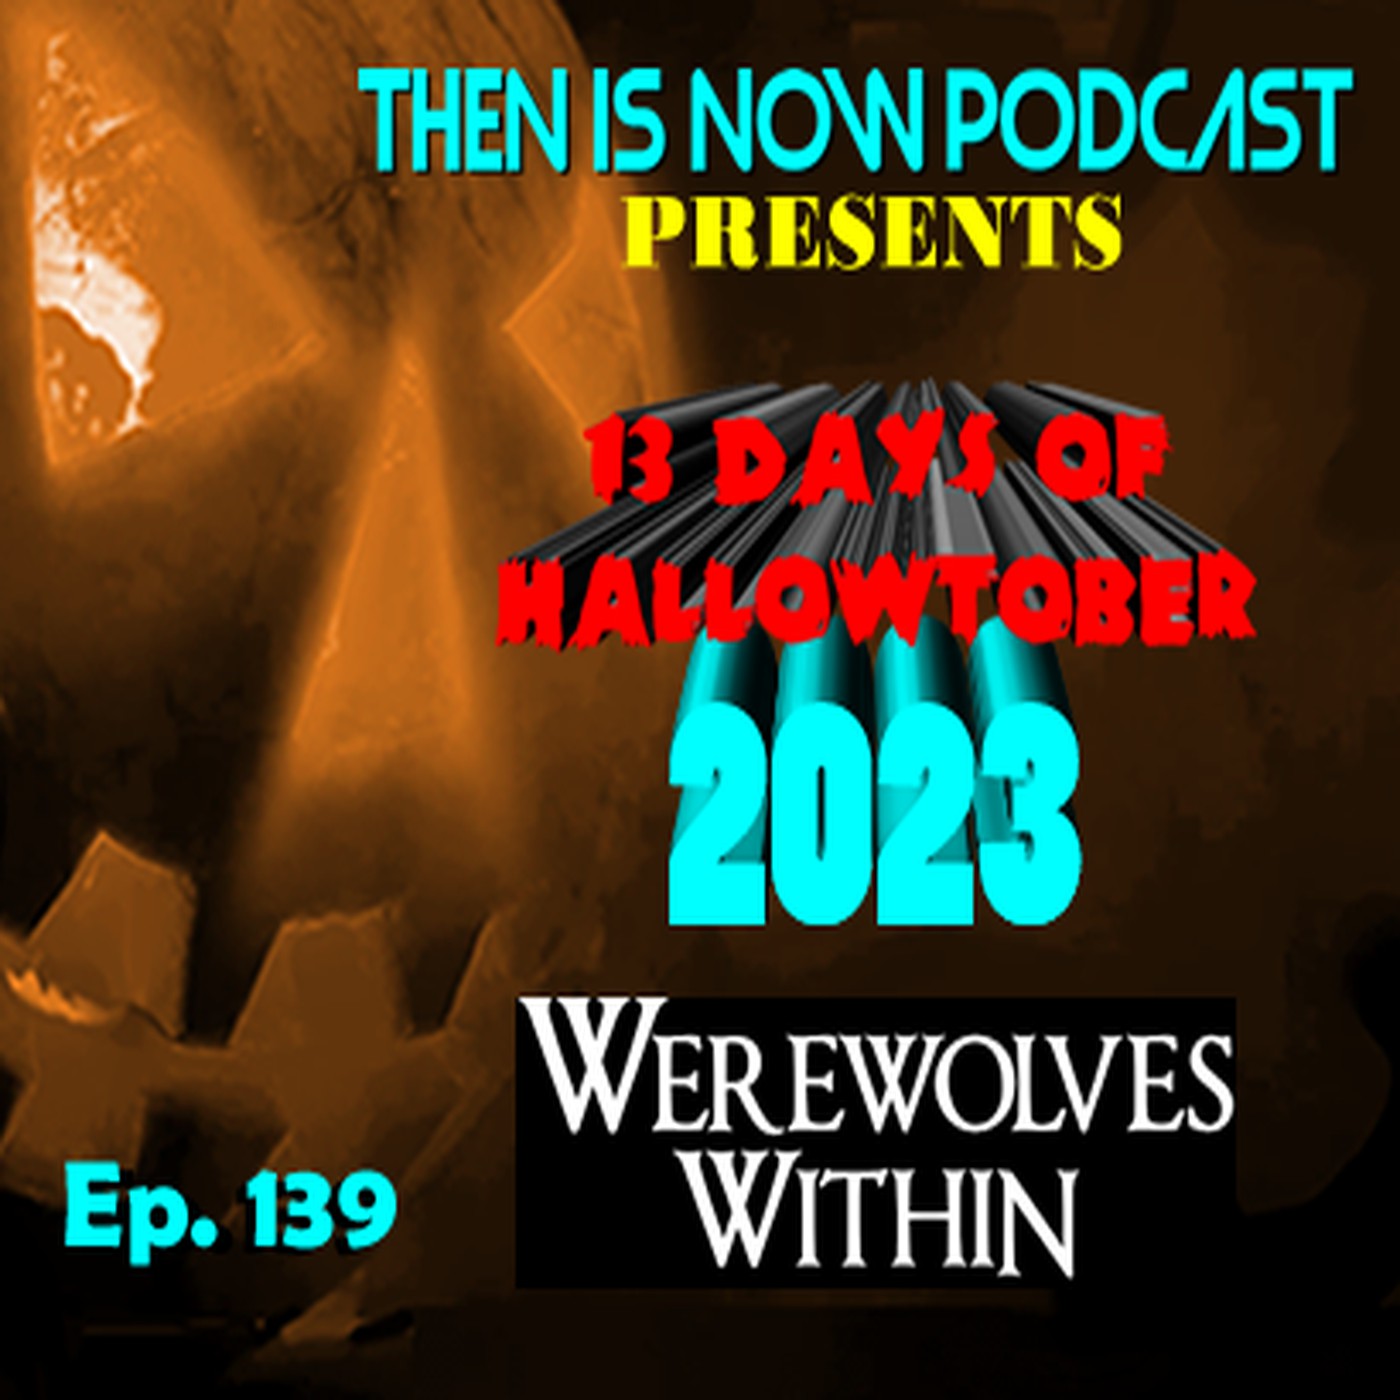 Then Is Now Ep. 139 - 13 Days of Hallowtober 2023 - Werewolves Within (2021)